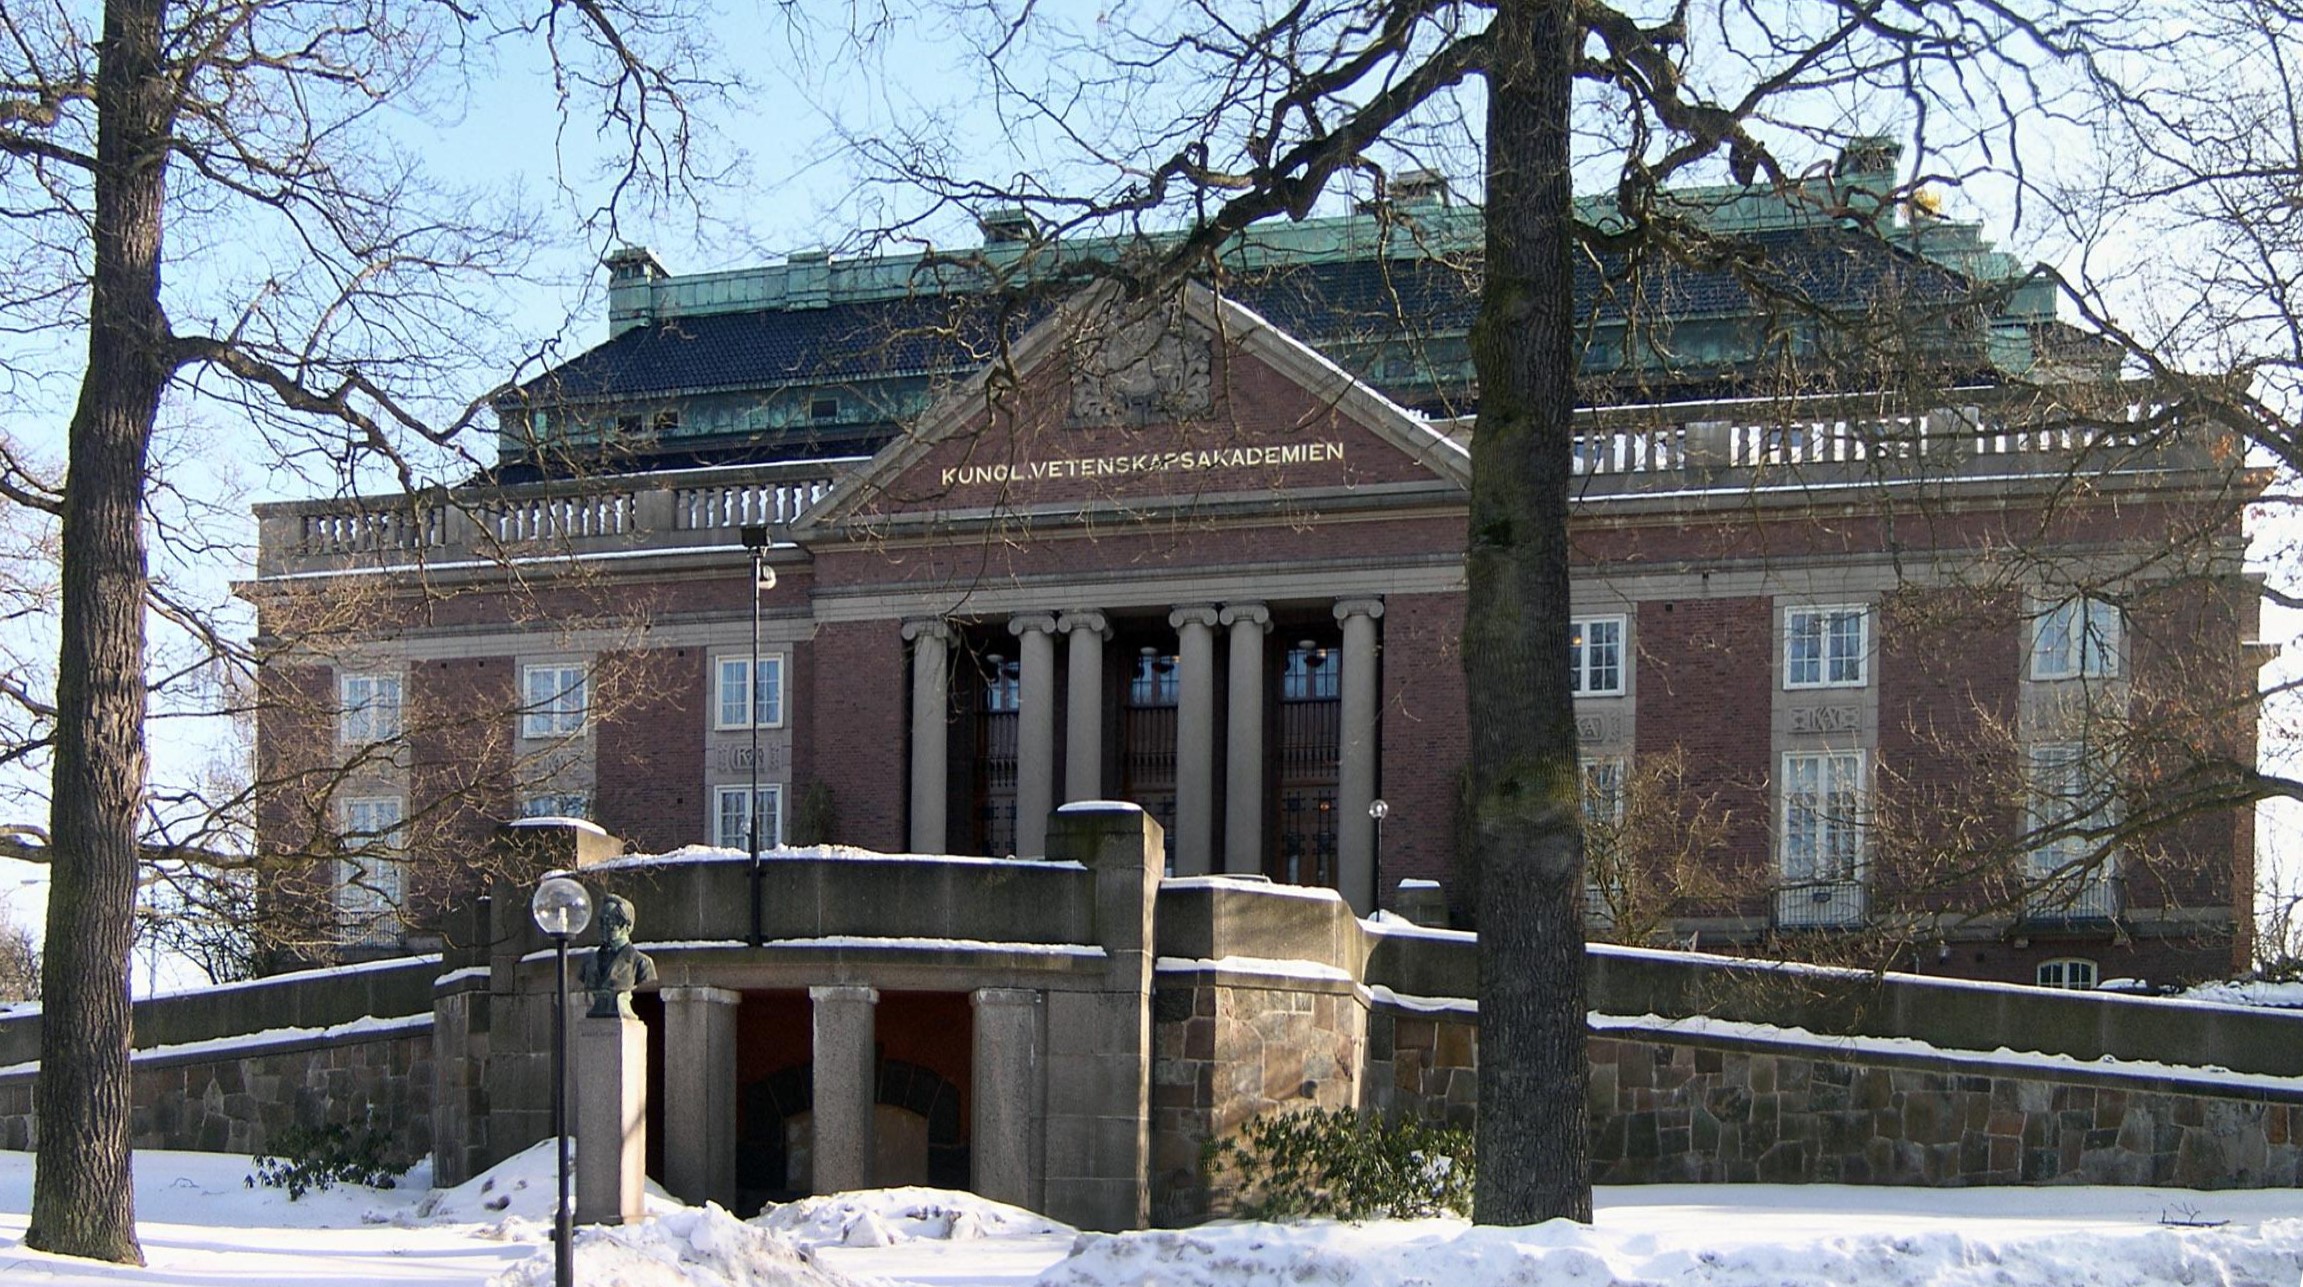 The Royal Swedish Academy of Sciences